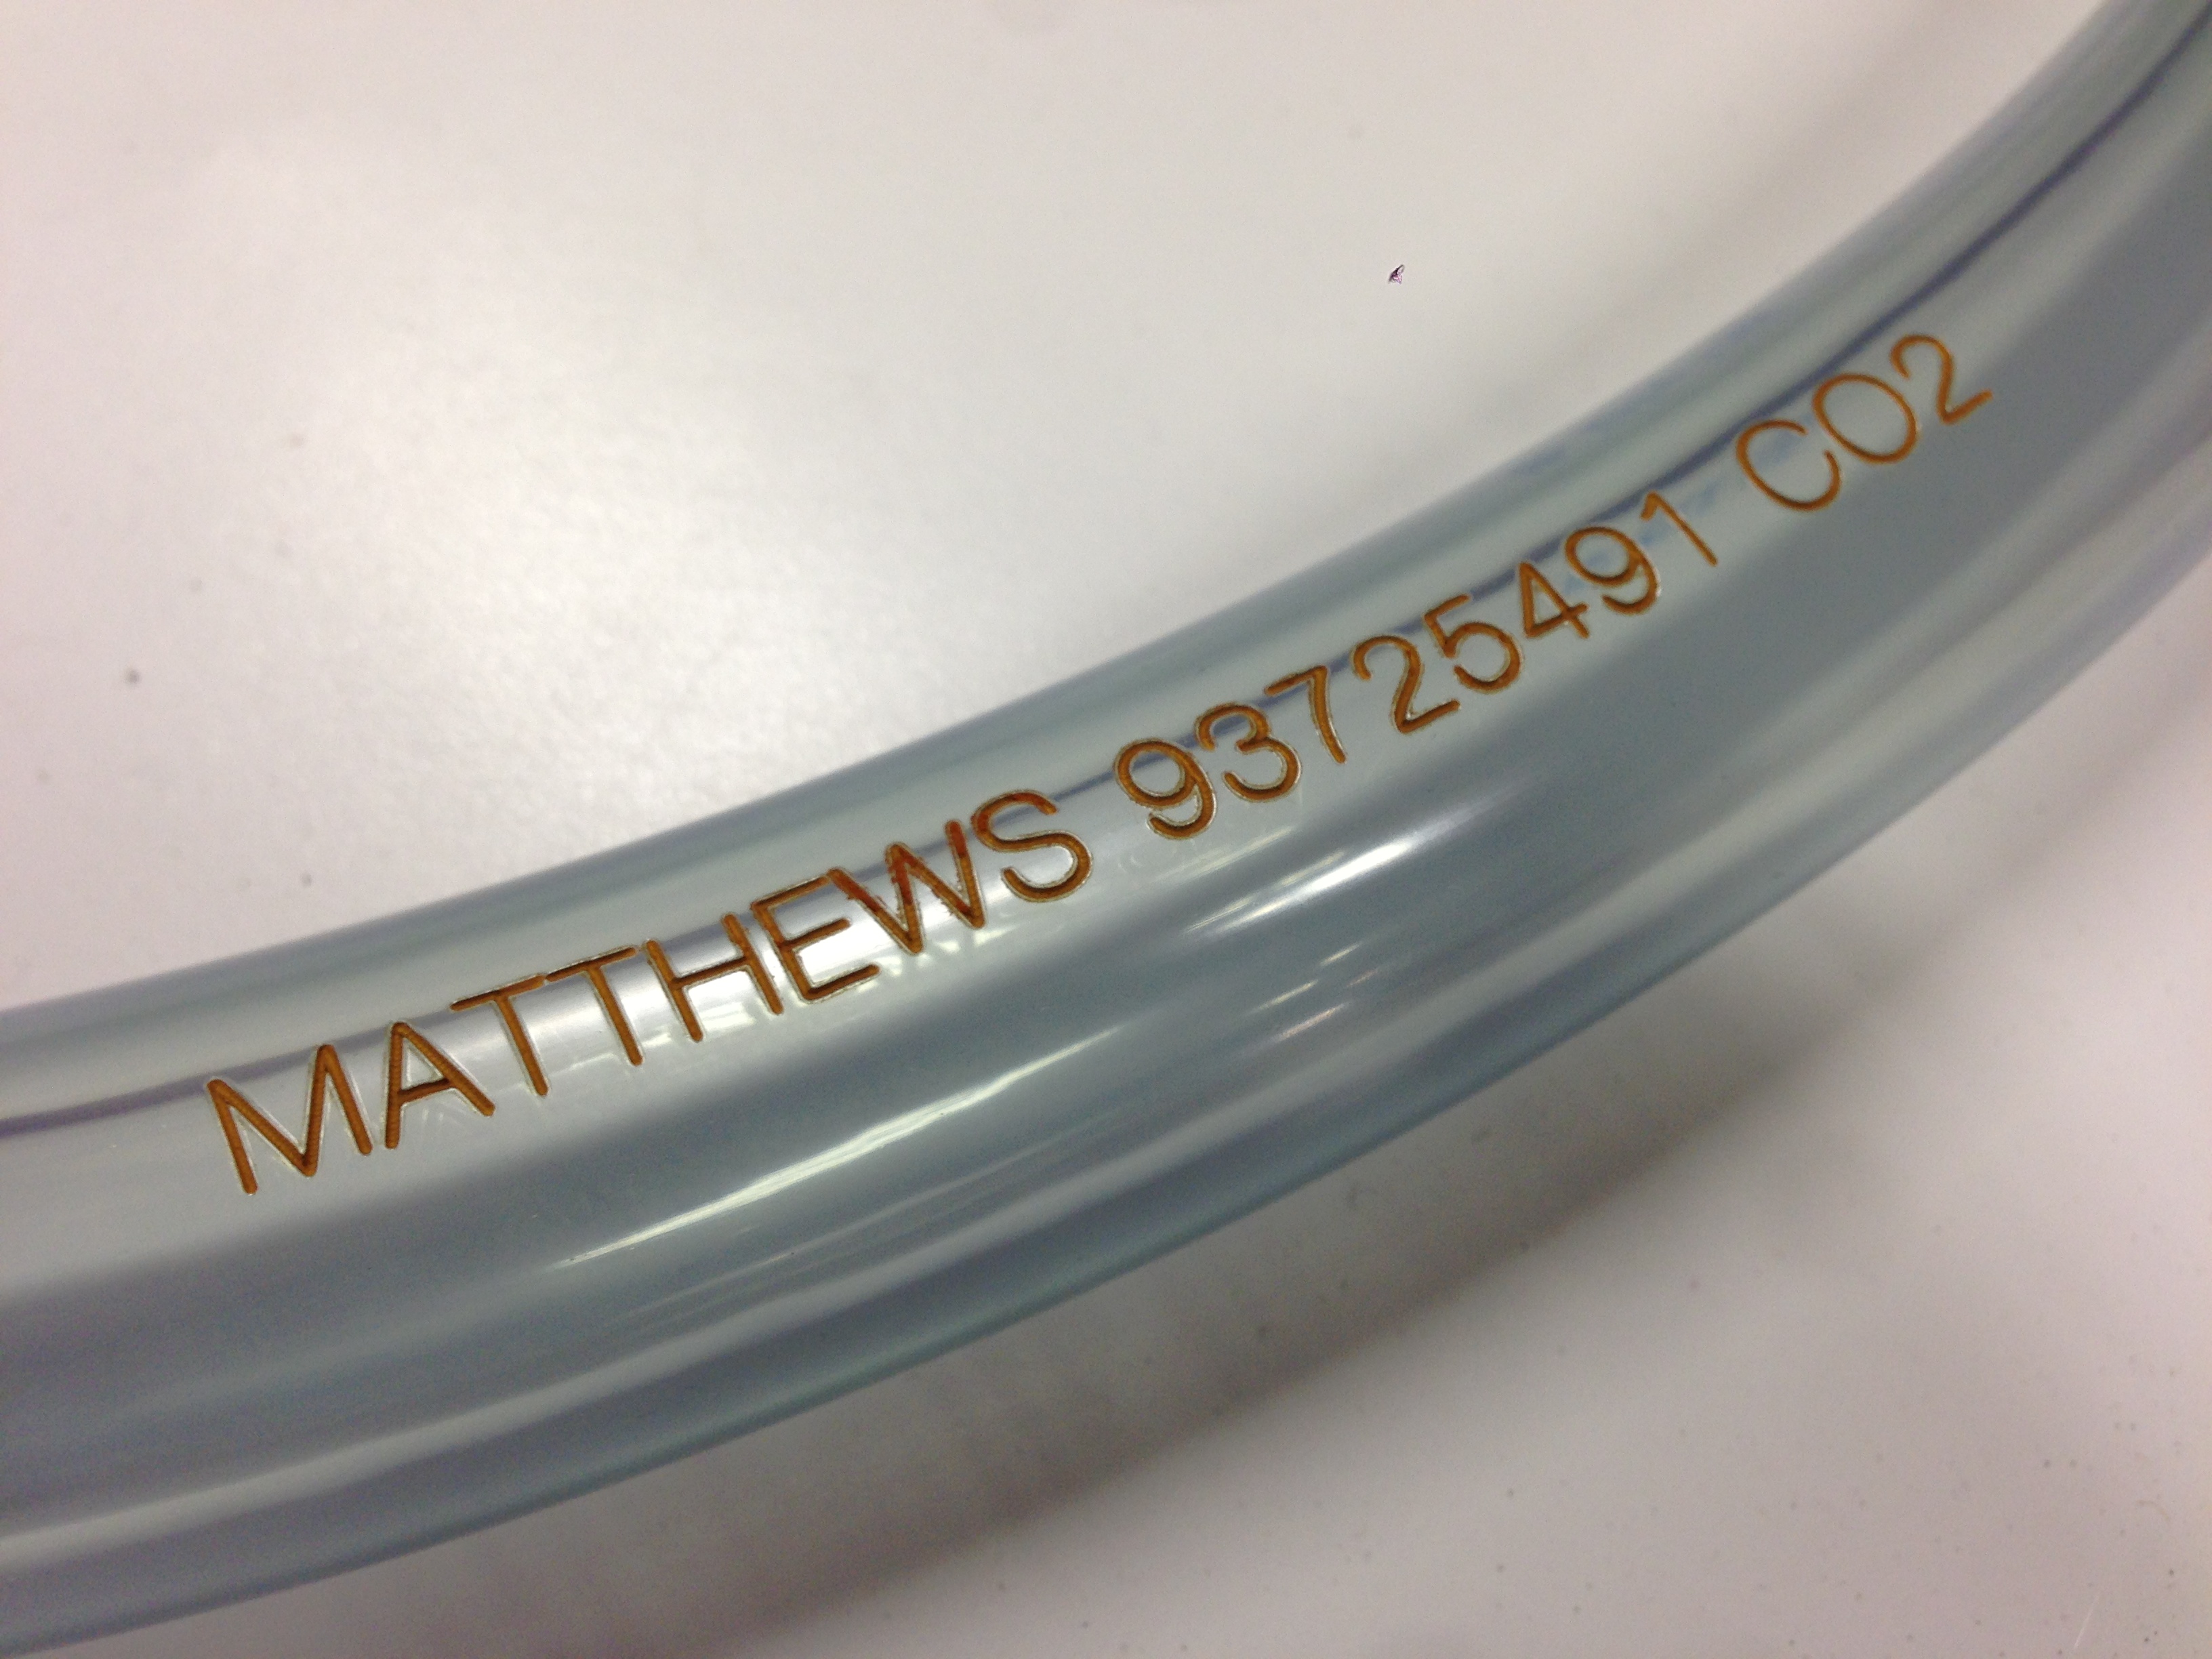 Alphanumeric code on rubber or plastic tubing with MMS laser 